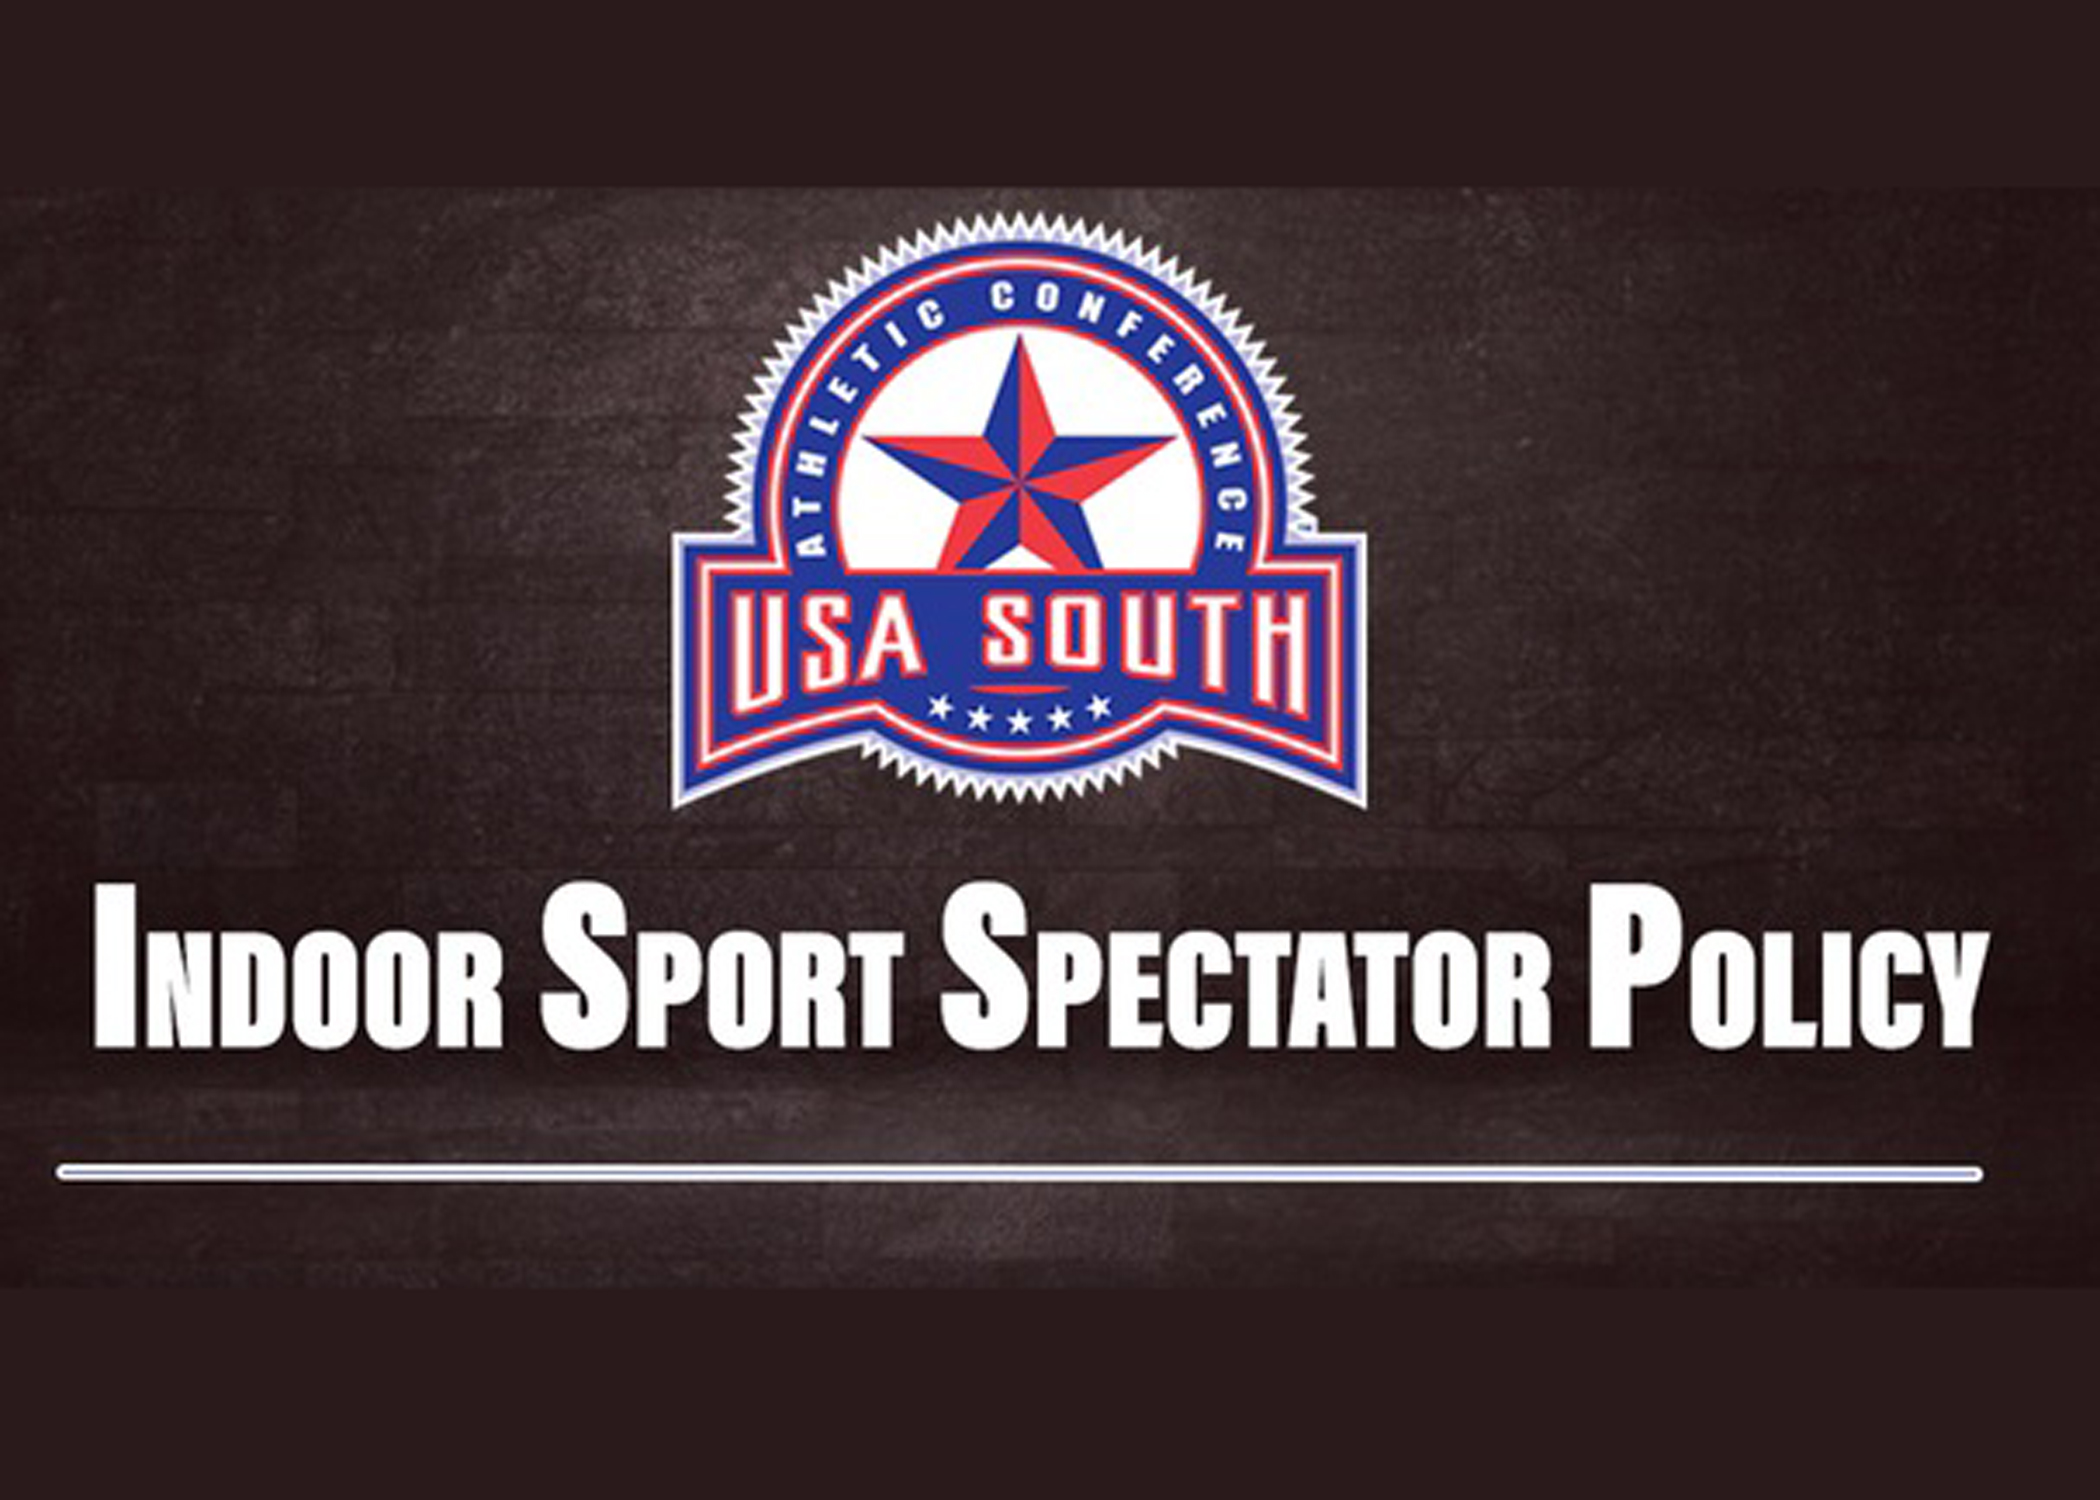 USA South Indoor Spectator Policy Announcement